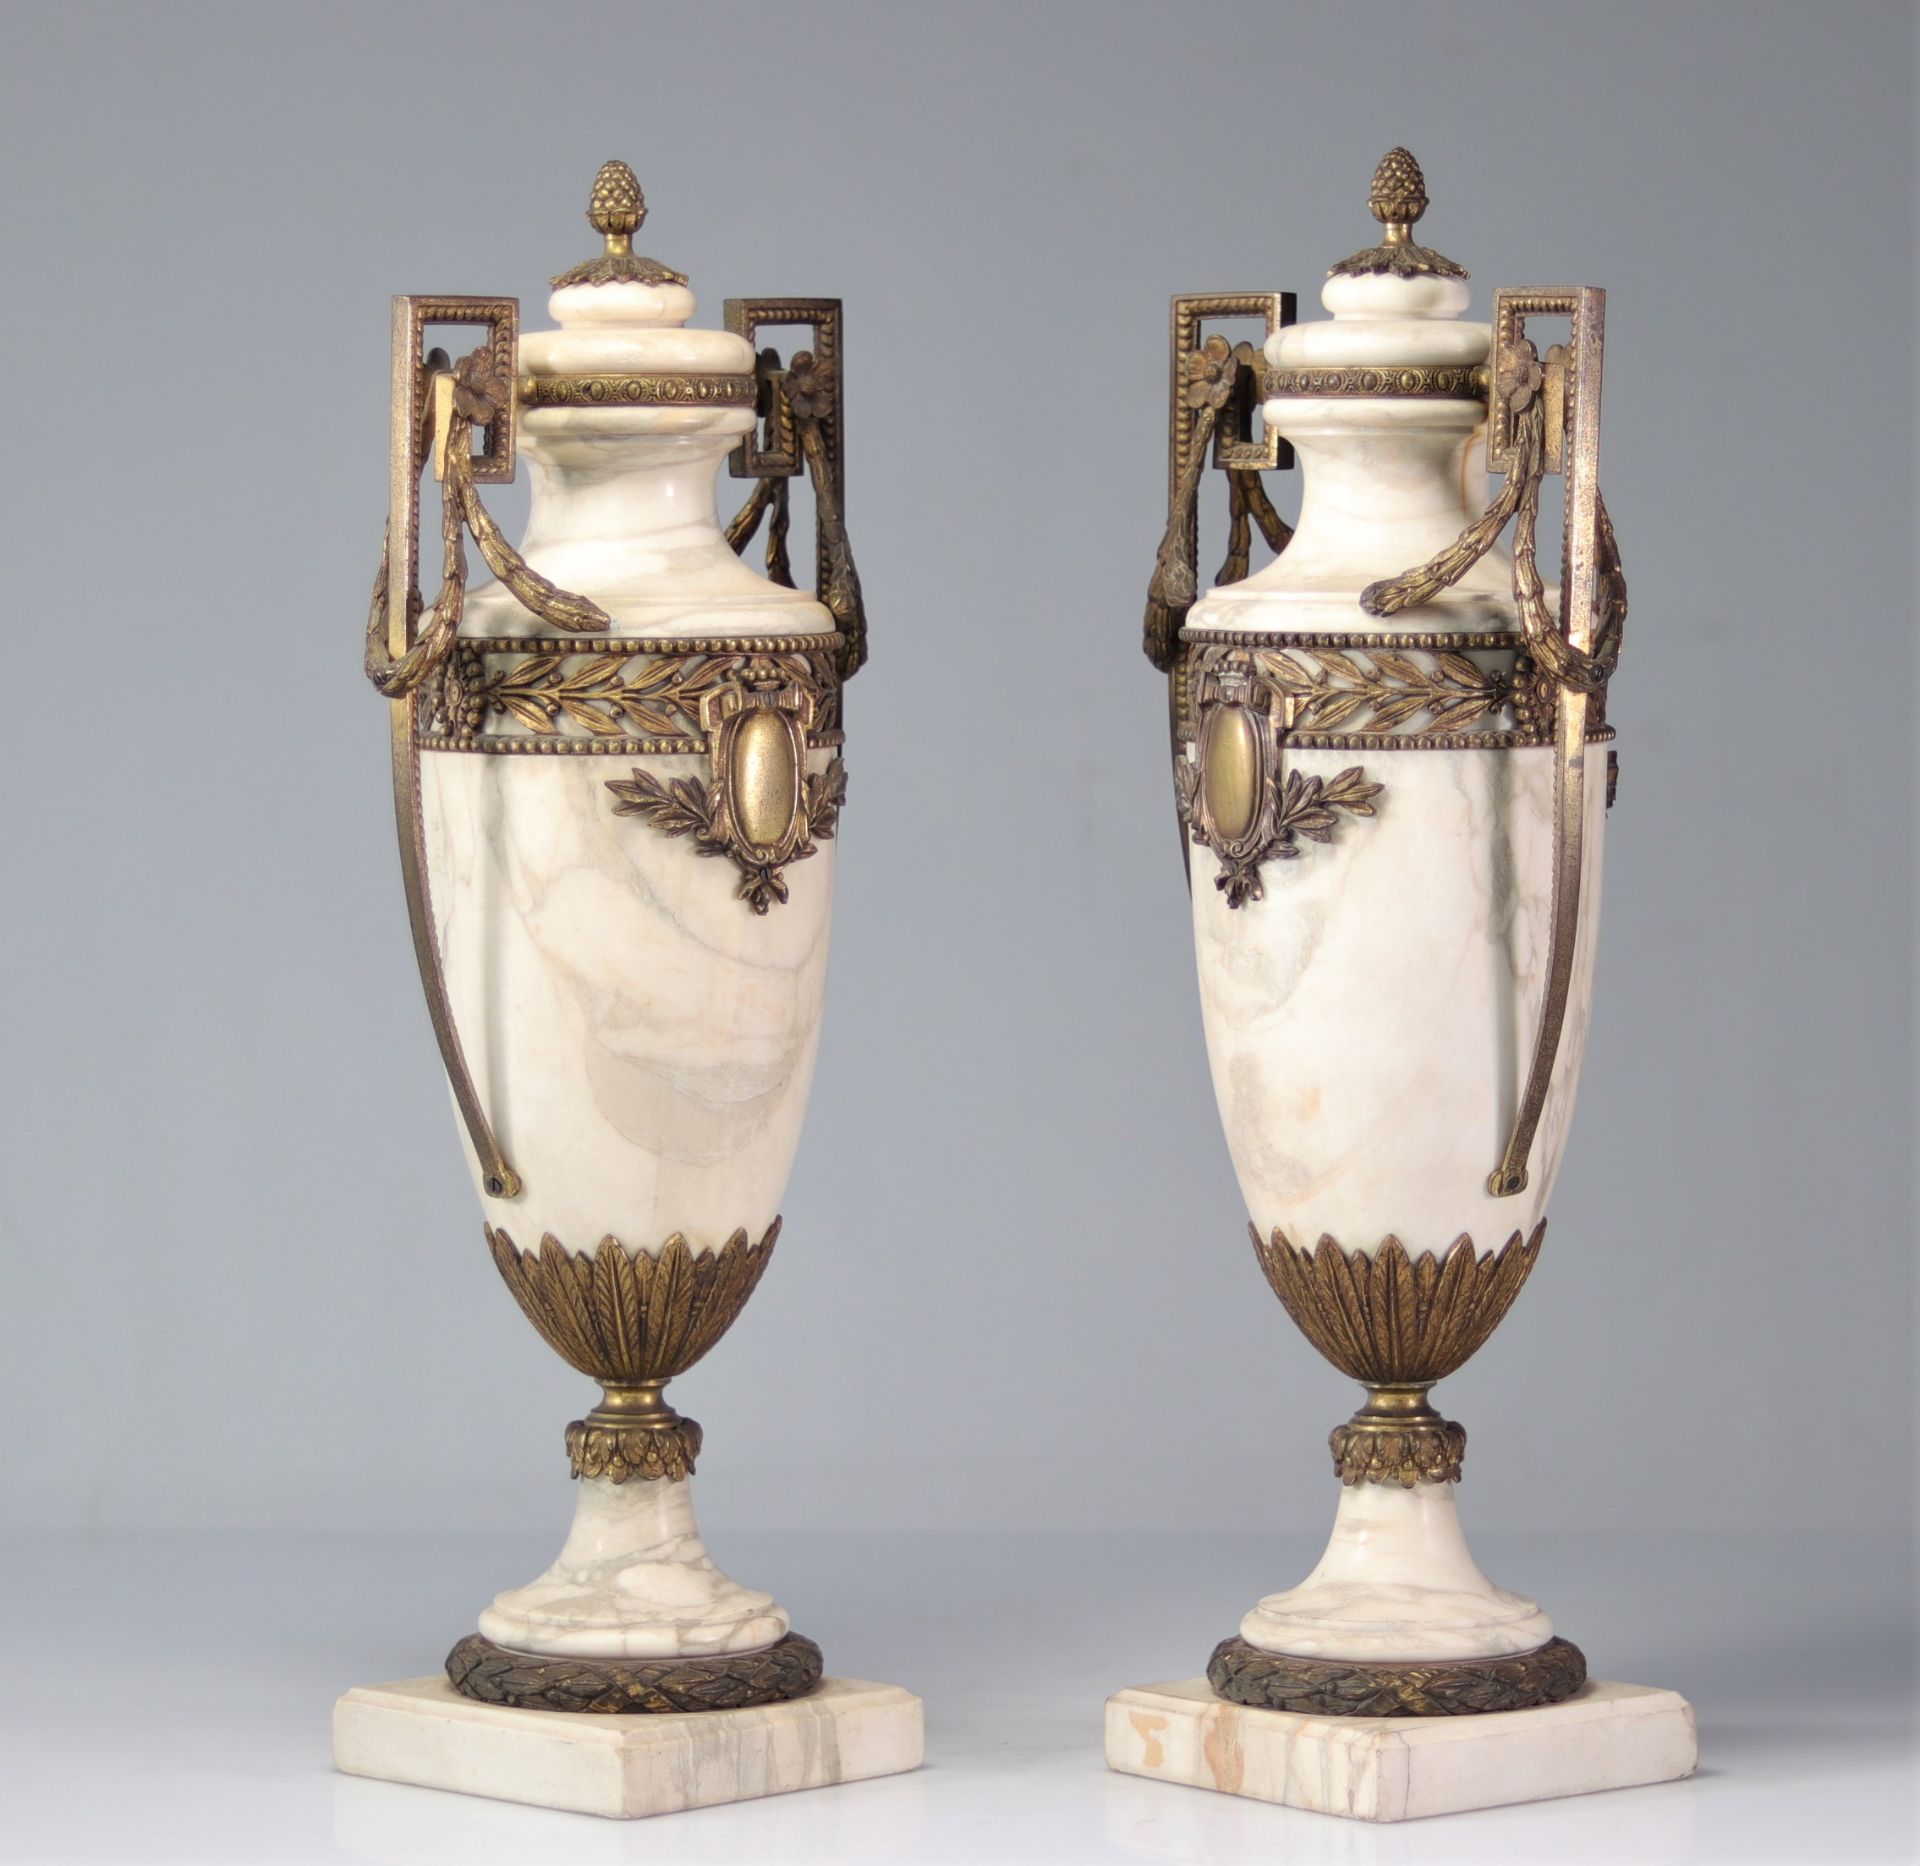 Pair of marble vases with gilt bronze mounts - Image 3 of 4